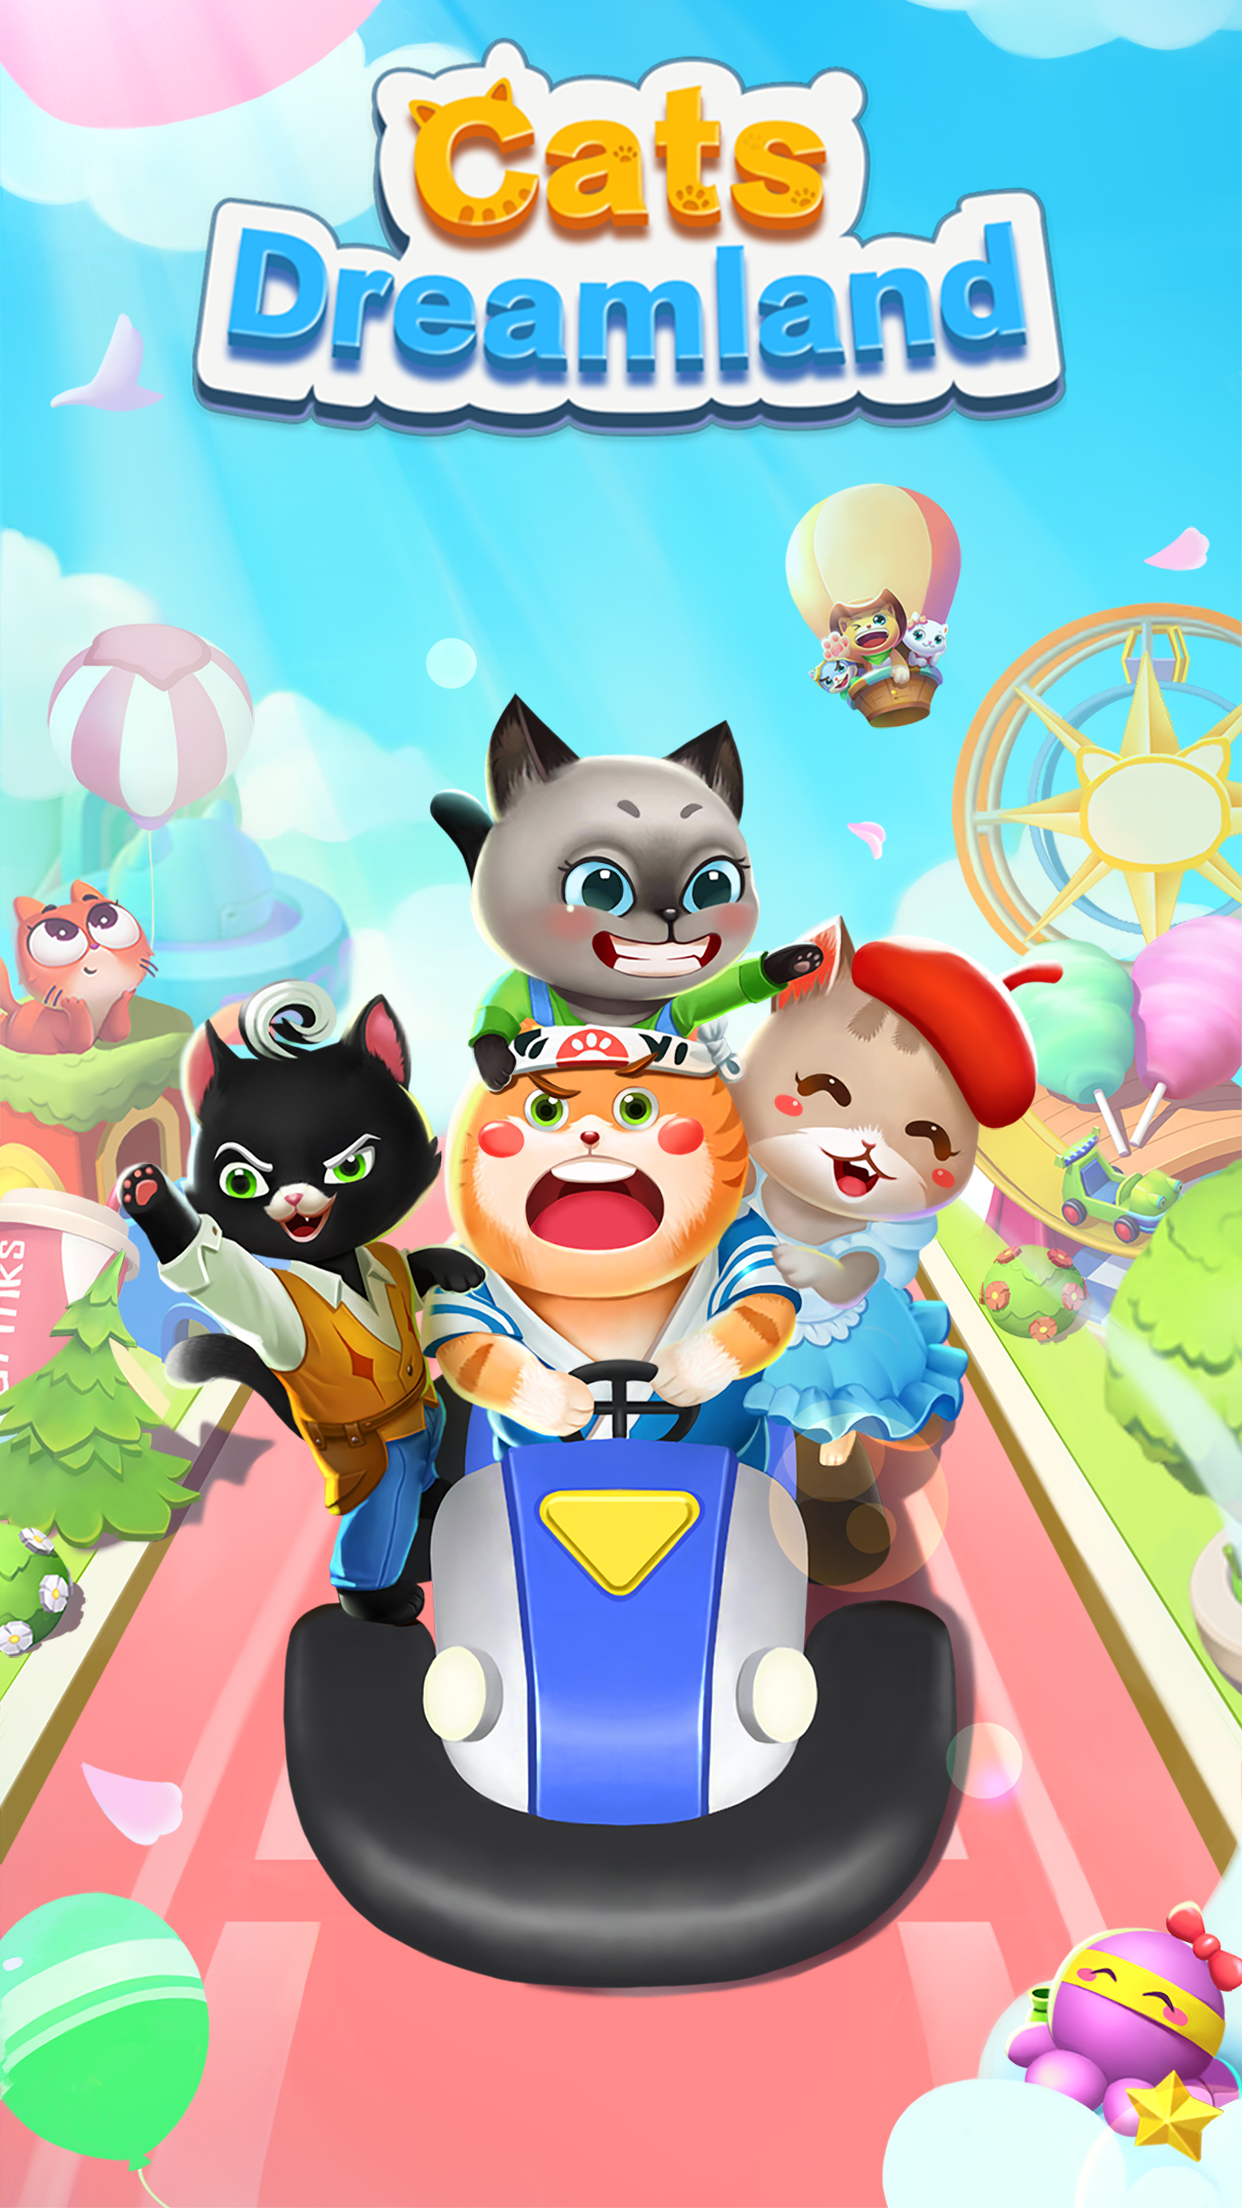 Cats Dreamland:  Free Match 3 Puzzle Game游戏截图